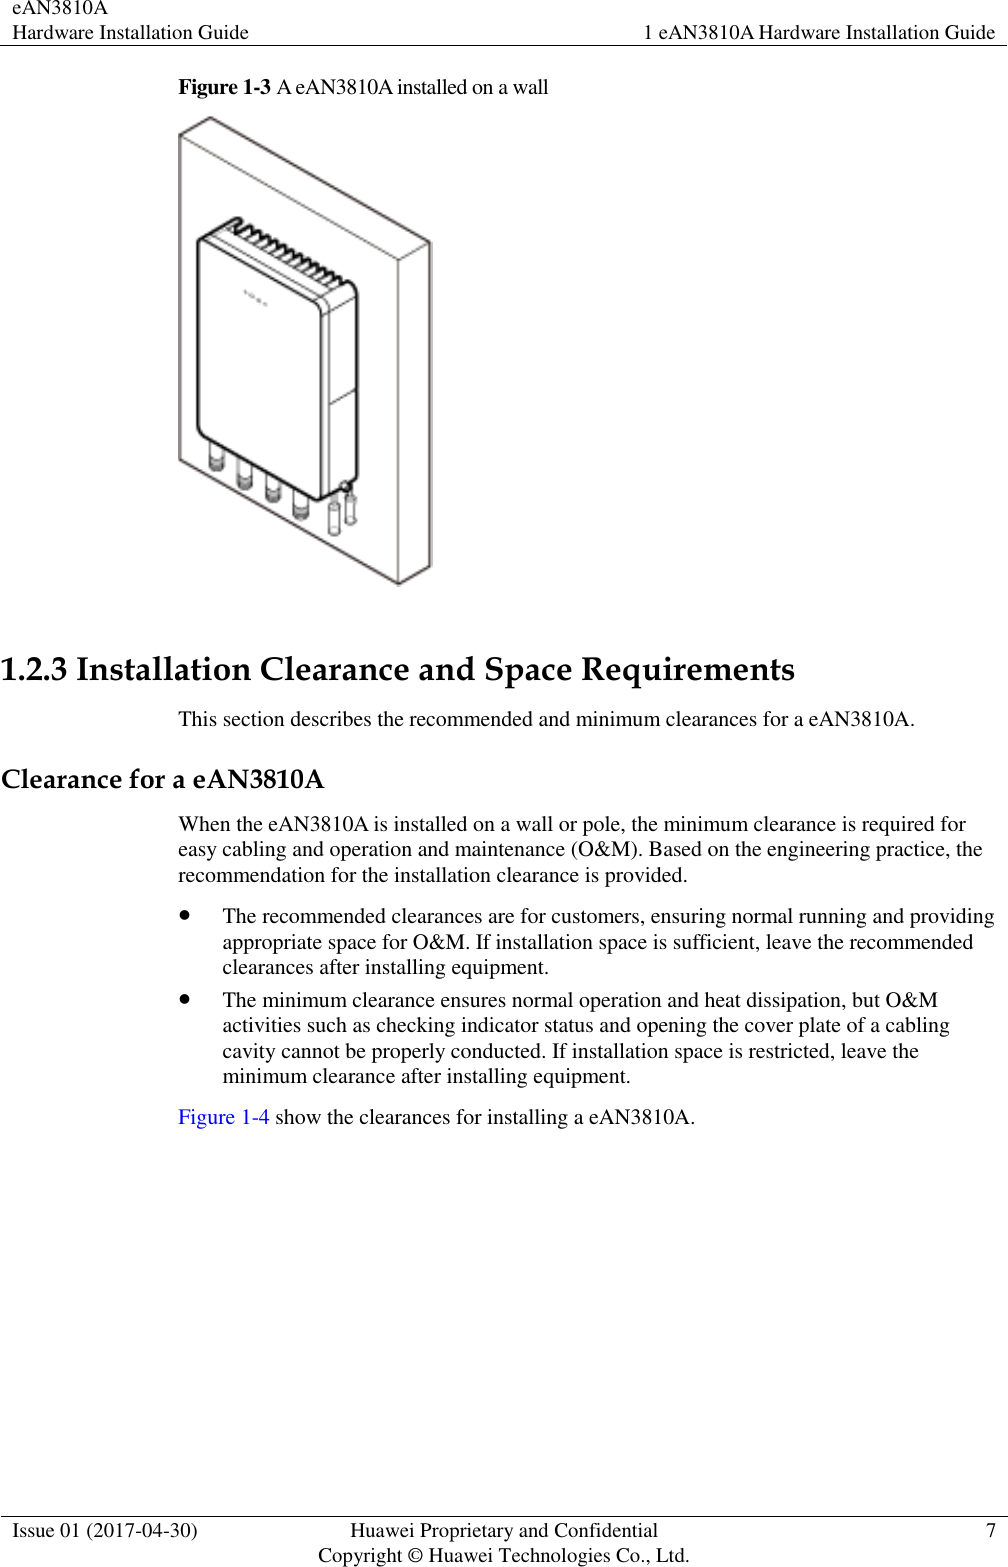 eAN3810A   Hardware Installation Guide 1 eAN3810A Hardware Installation Guide  Issue 01 (2017-04-30) Huawei Proprietary and Confidential                                     Copyright © Huawei Technologies Co., Ltd. 7  Figure 1-3 A eAN3810A installed on a wall   1.2.3 Installation Clearance and Space Requirements This section describes the recommended and minimum clearances for a eAN3810A. Clearance for a eAN3810A When the eAN3810A is installed on a wall or pole, the minimum clearance is required for easy cabling and operation and maintenance (O&amp;M). Based on the engineering practice, the recommendation for the installation clearance is provided.    The recommended clearances are for customers, ensuring normal running and providing appropriate space for O&amp;M. If installation space is sufficient, leave the recommended clearances after installing equipment.  The minimum clearance ensures normal operation and heat dissipation, but O&amp;M activities such as checking indicator status and opening the cover plate of a cabling cavity cannot be properly conducted. If installation space is restricted, leave the minimum clearance after installing equipment. Figure 1-4 show the clearances for installing a eAN3810A. 